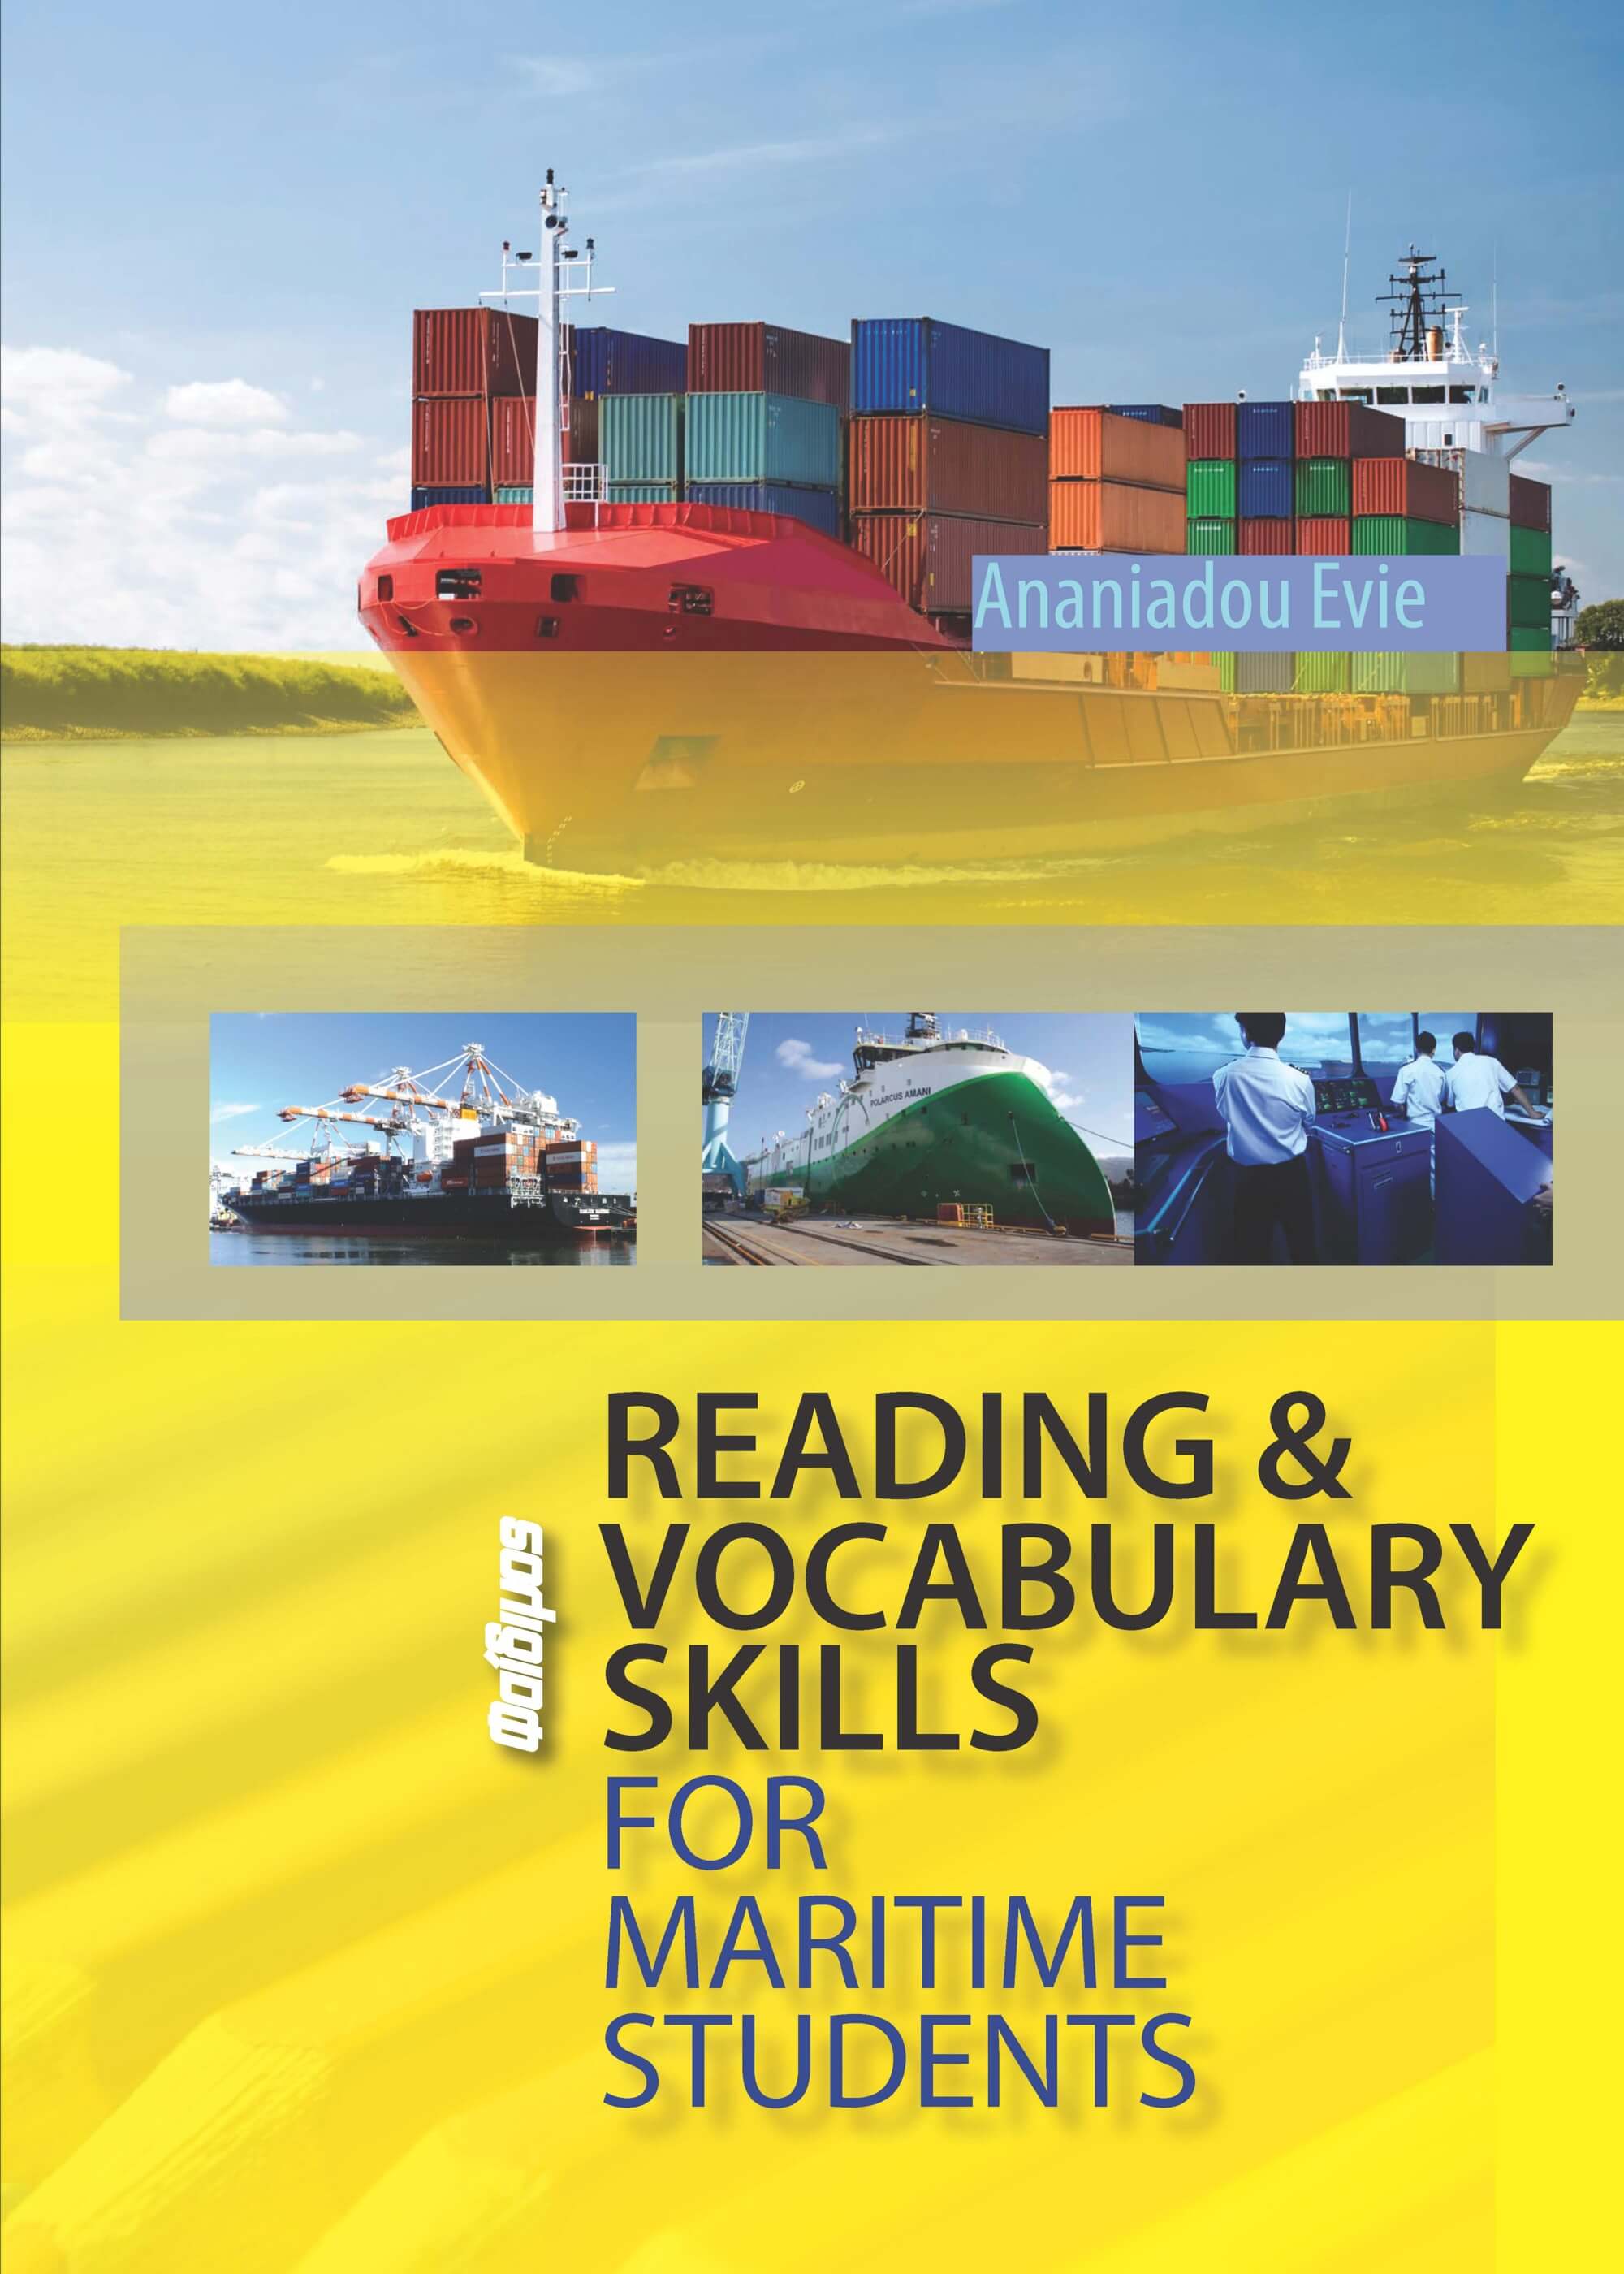 research topic for maritime students